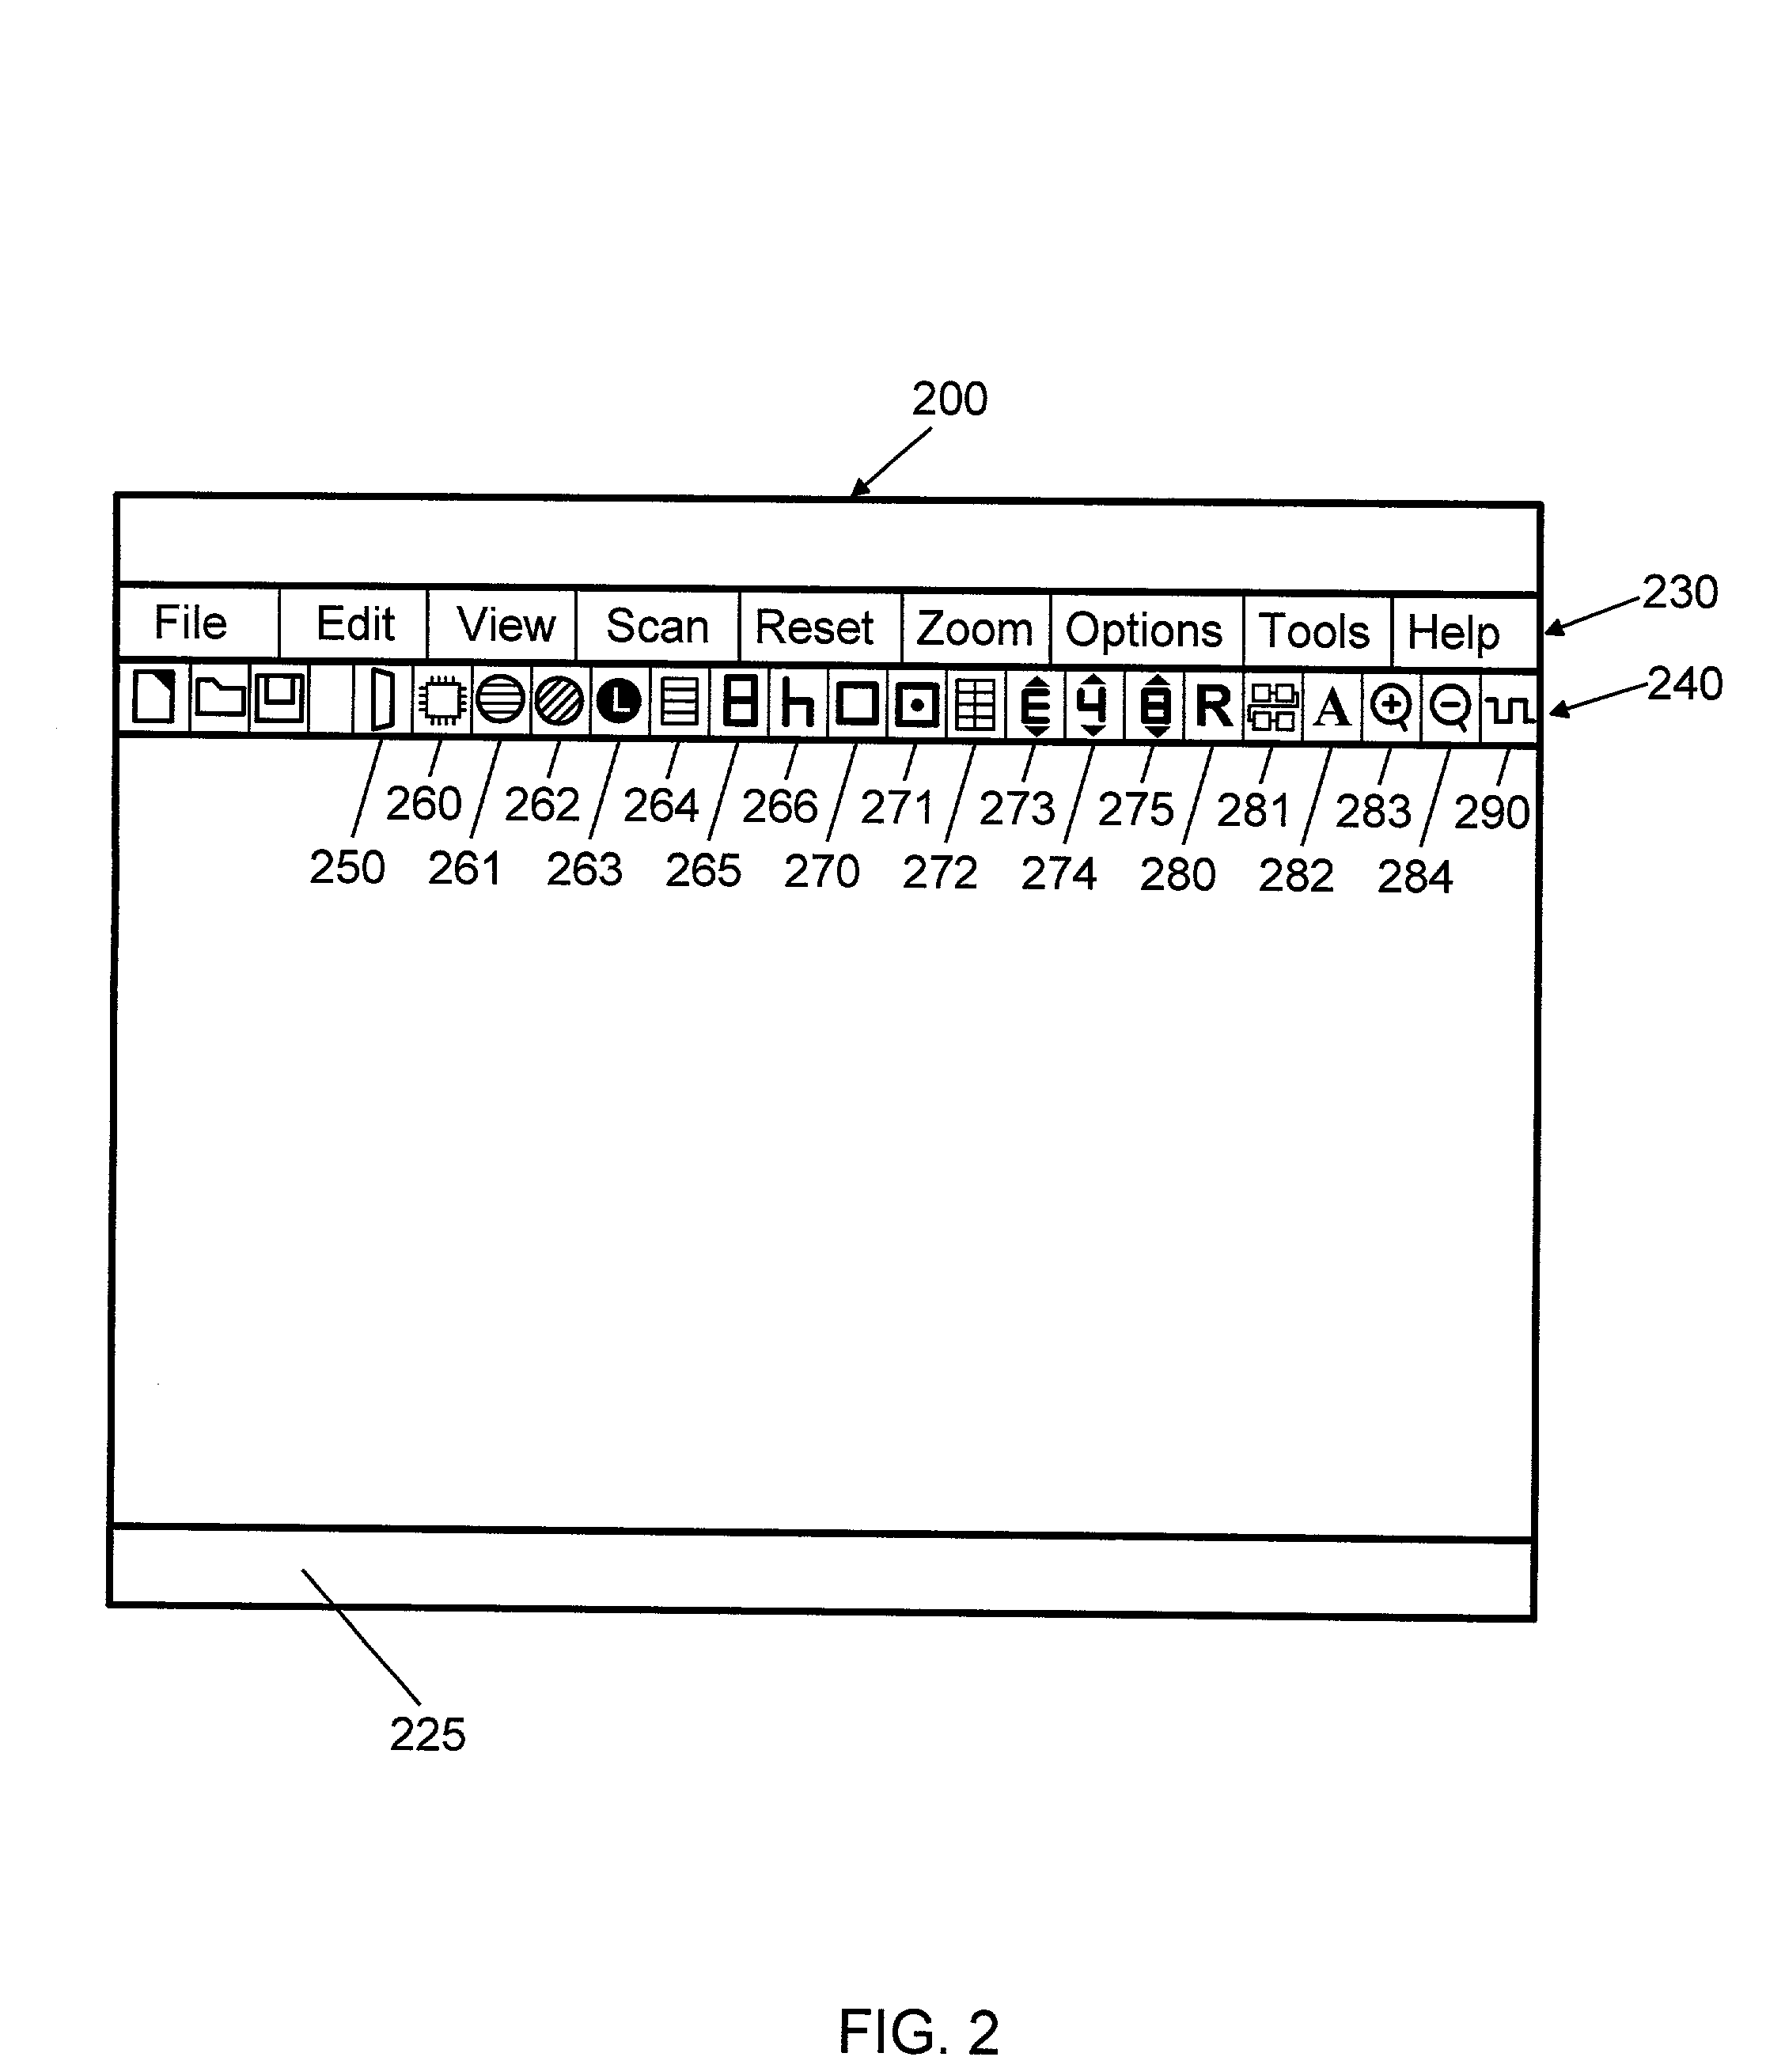 Method and apparatus for monitoring and controlling boundary scan enabled devices